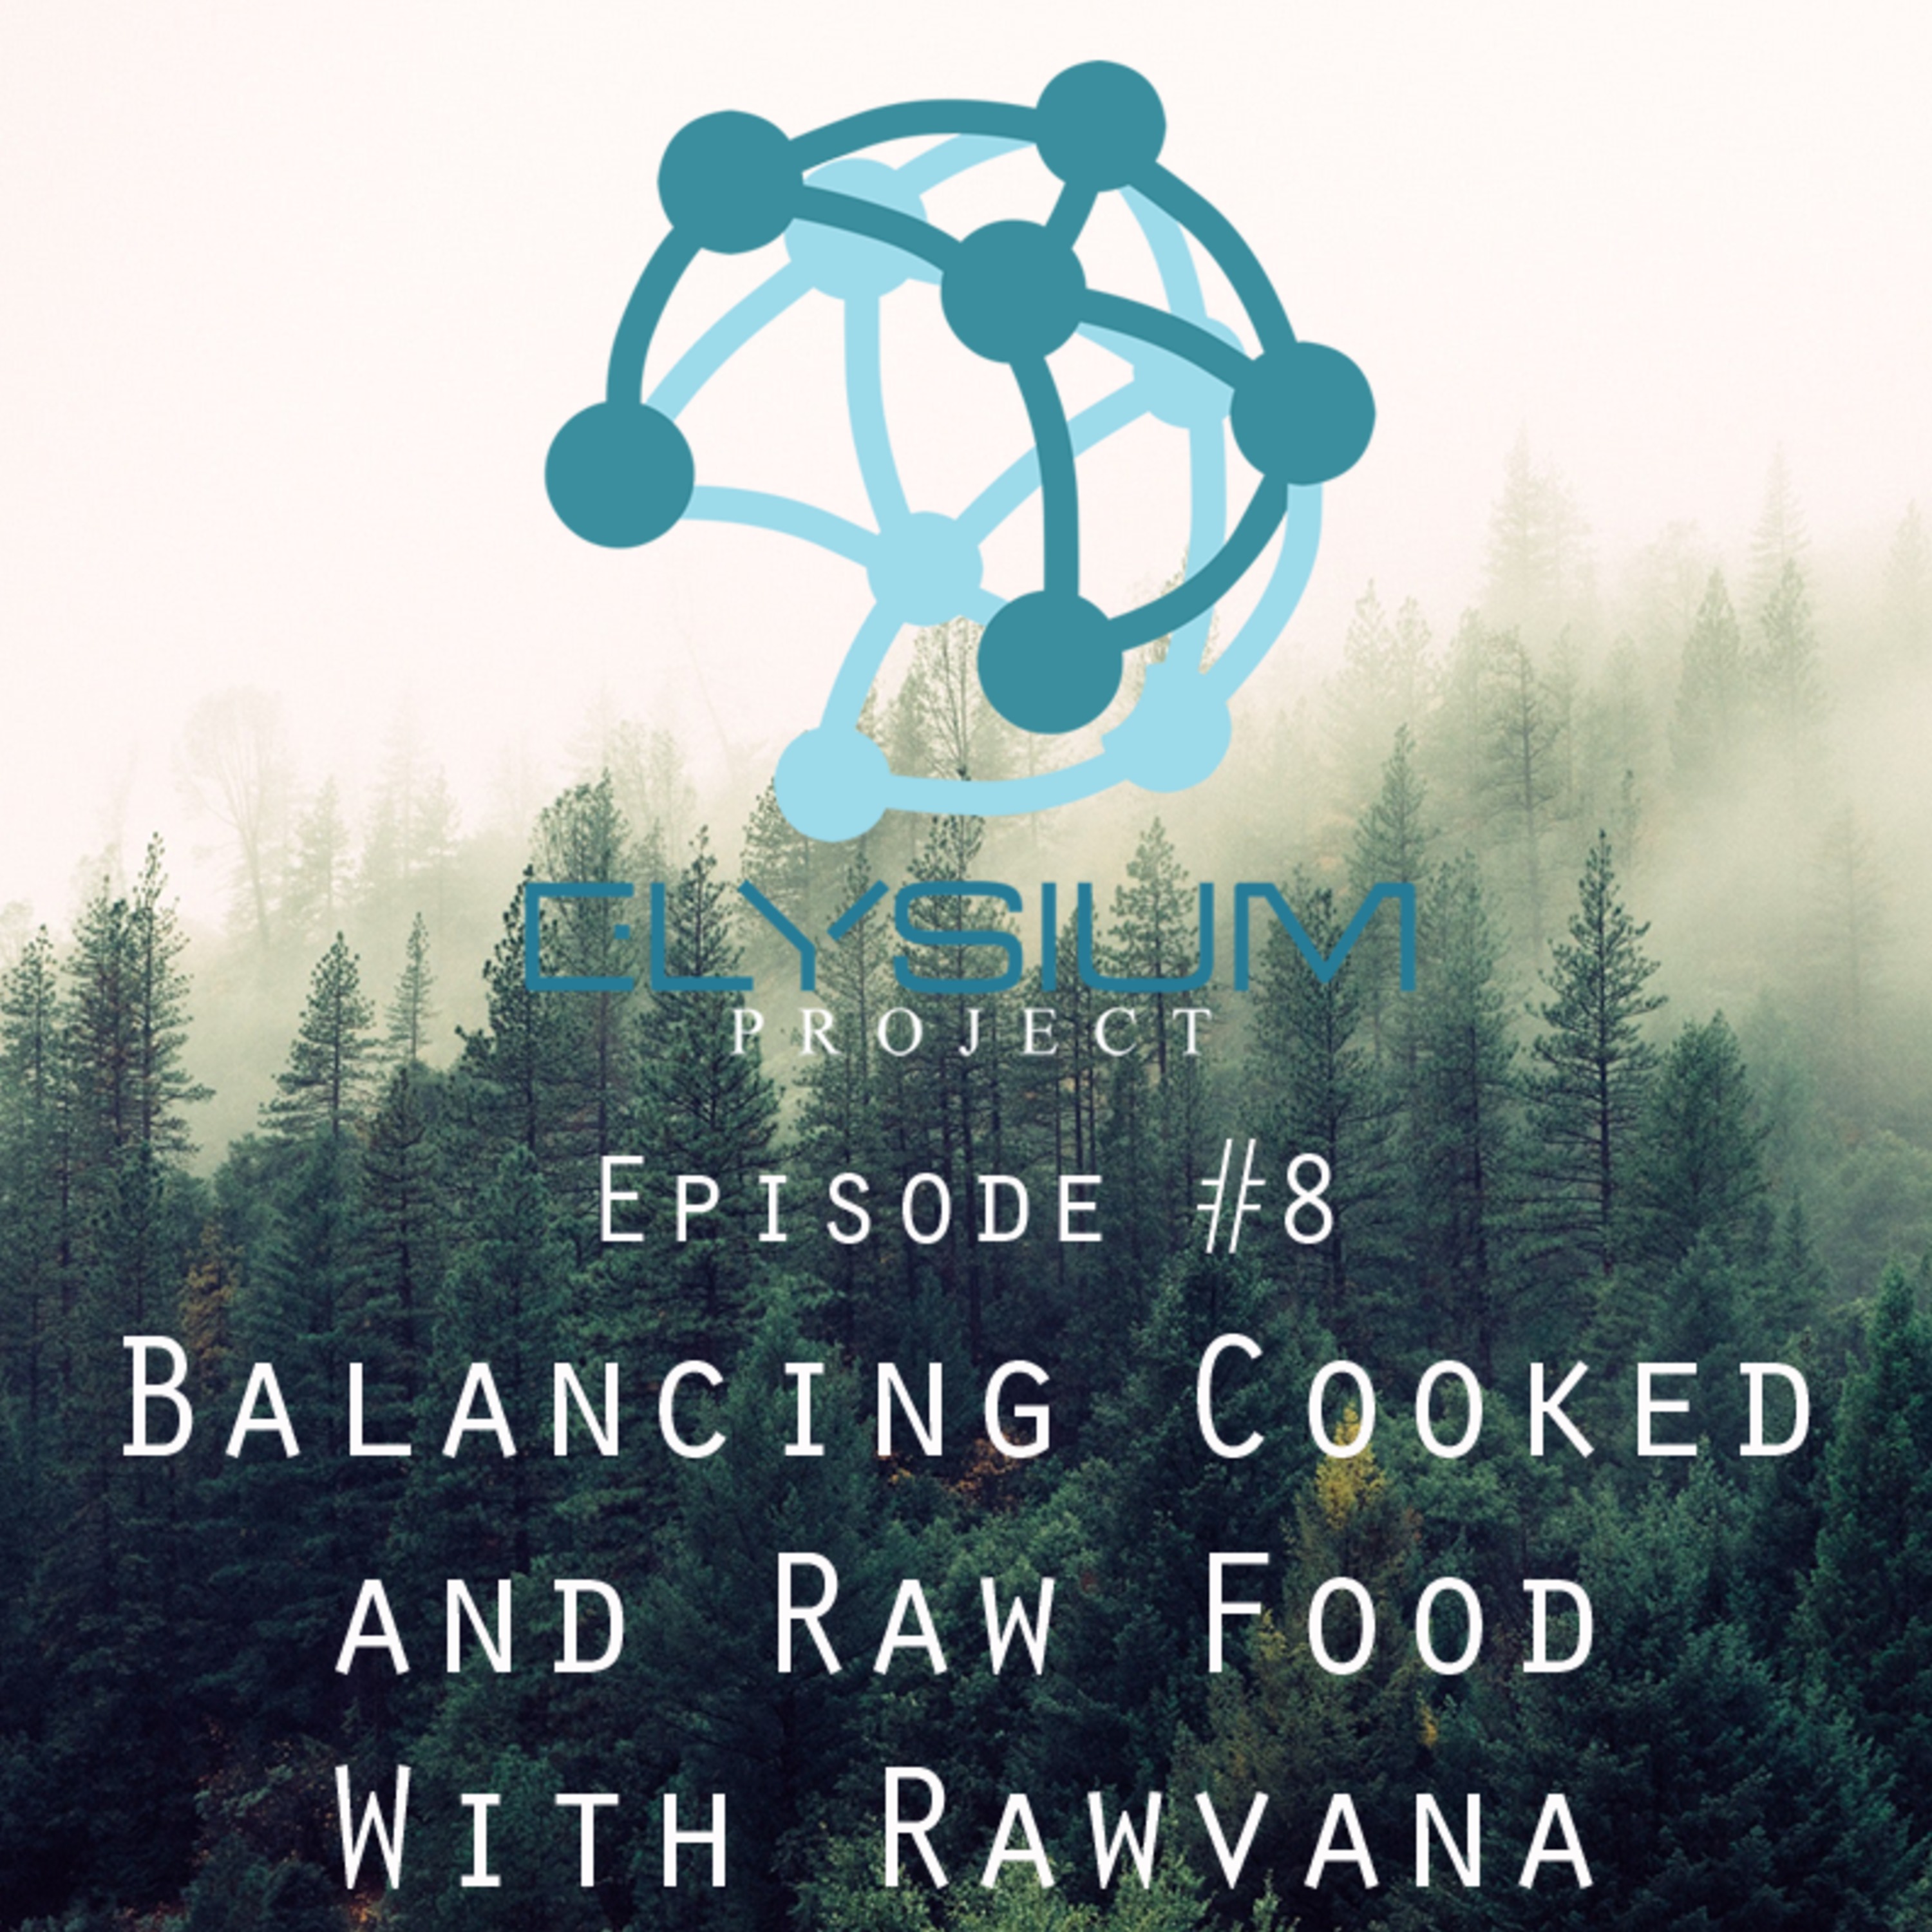 Episode 8: Balancing Cooked and Raw Food with RawVana